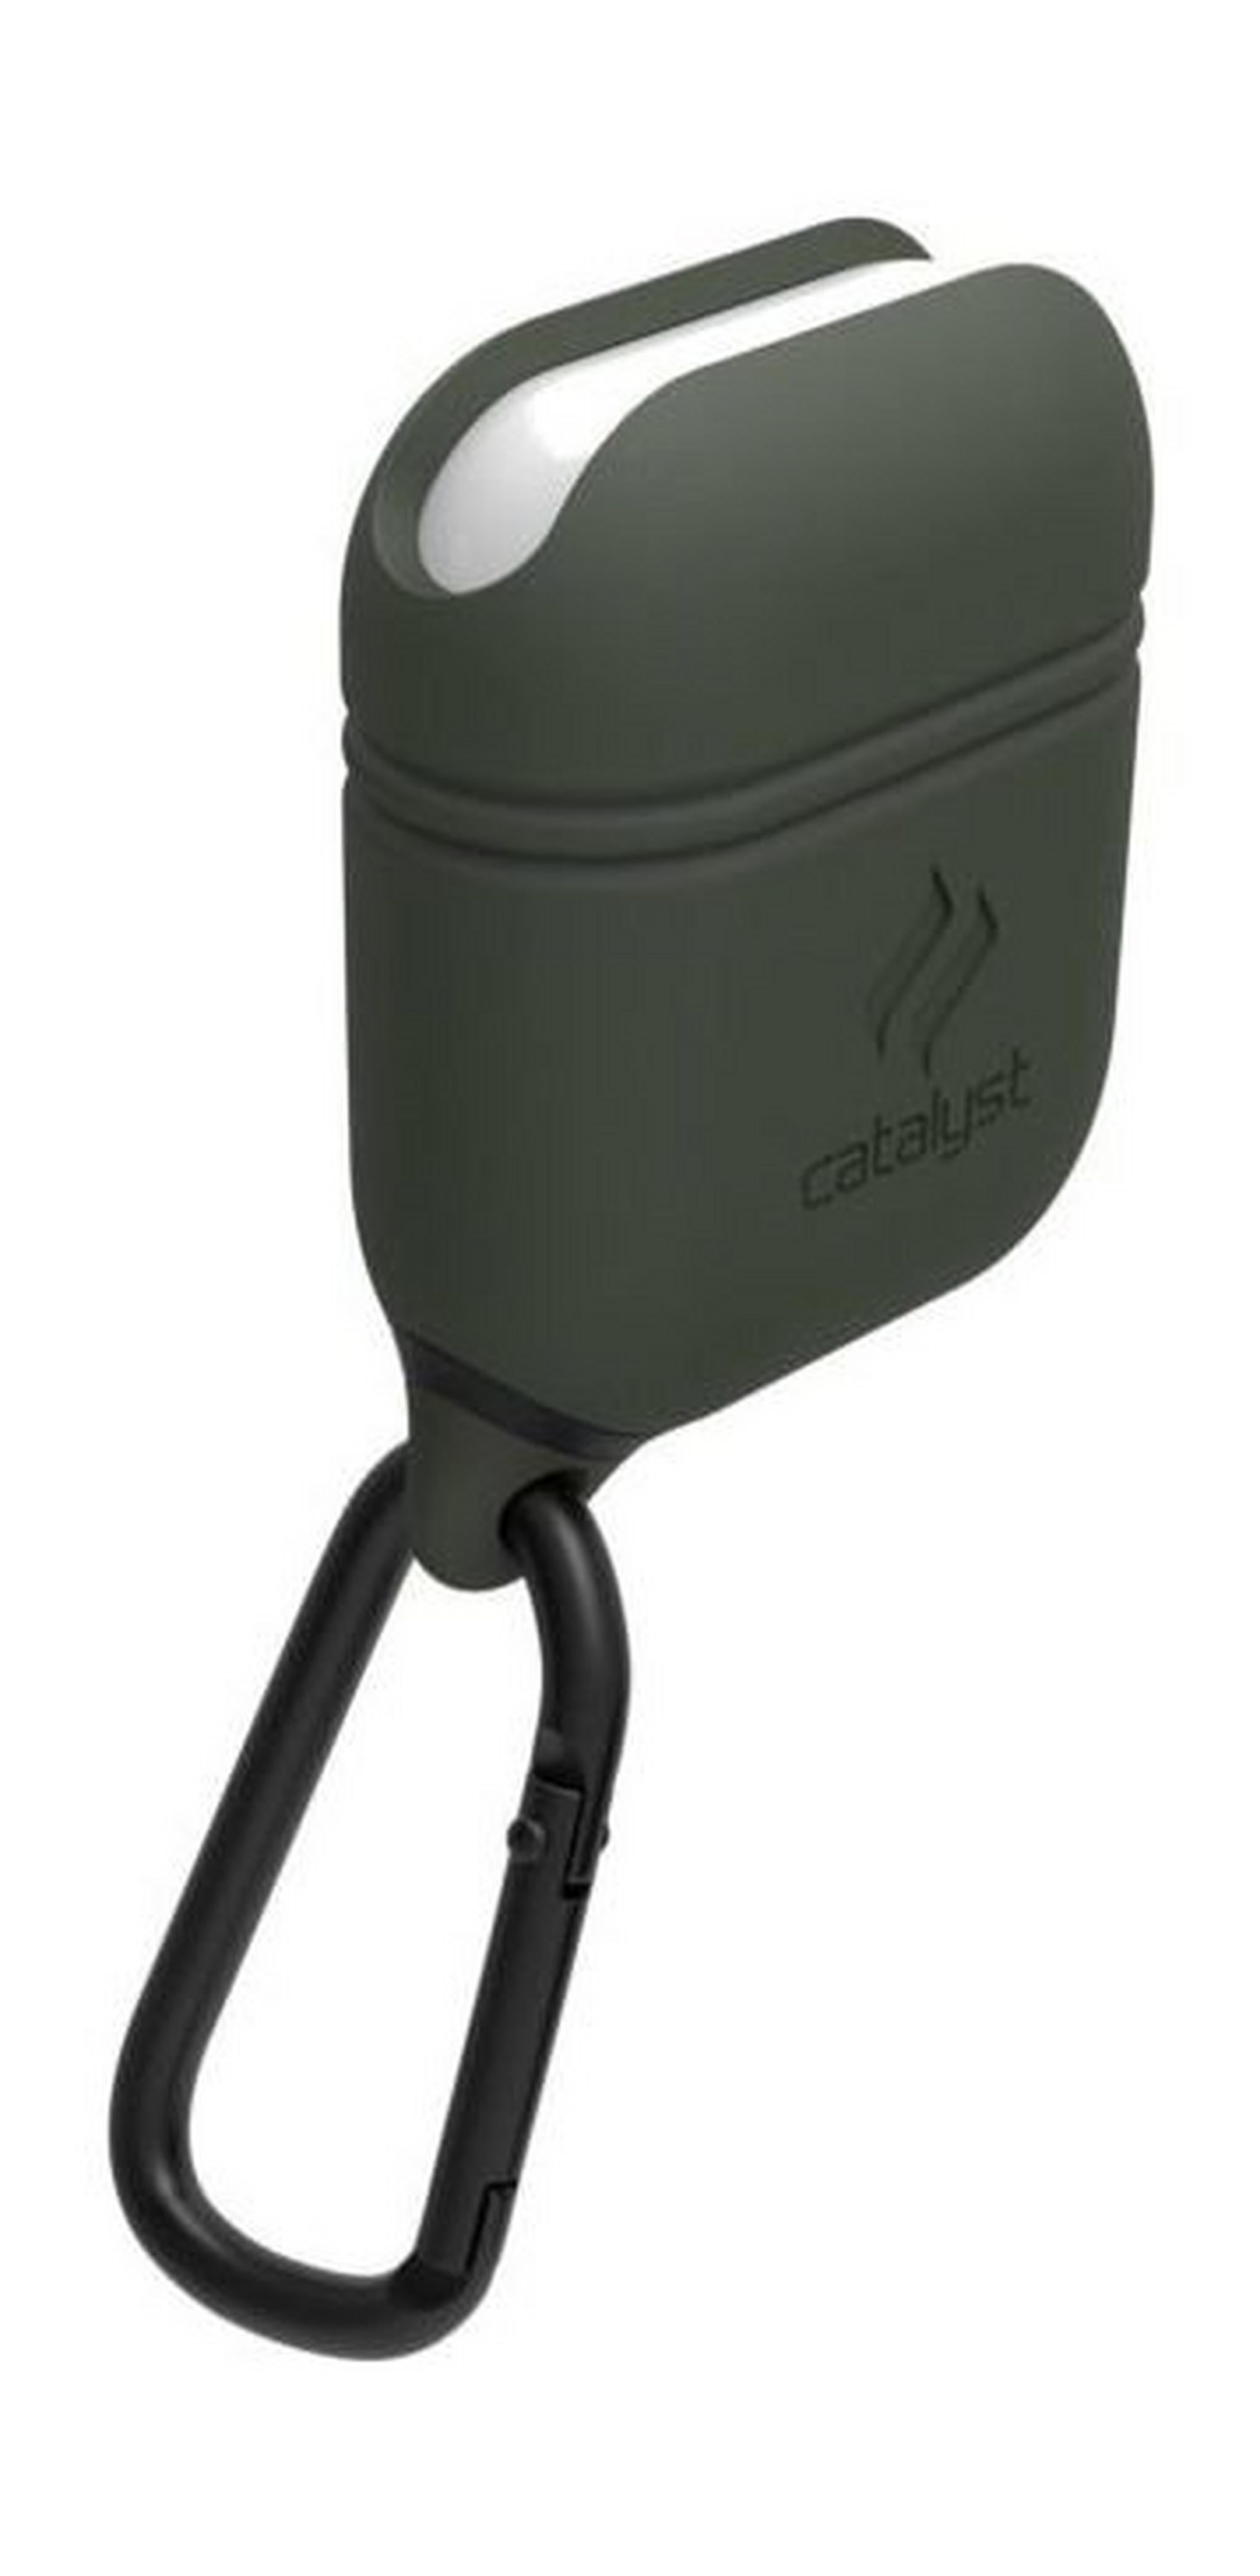 Catalyst Waterproof Case for Apple AirPod - Army Green